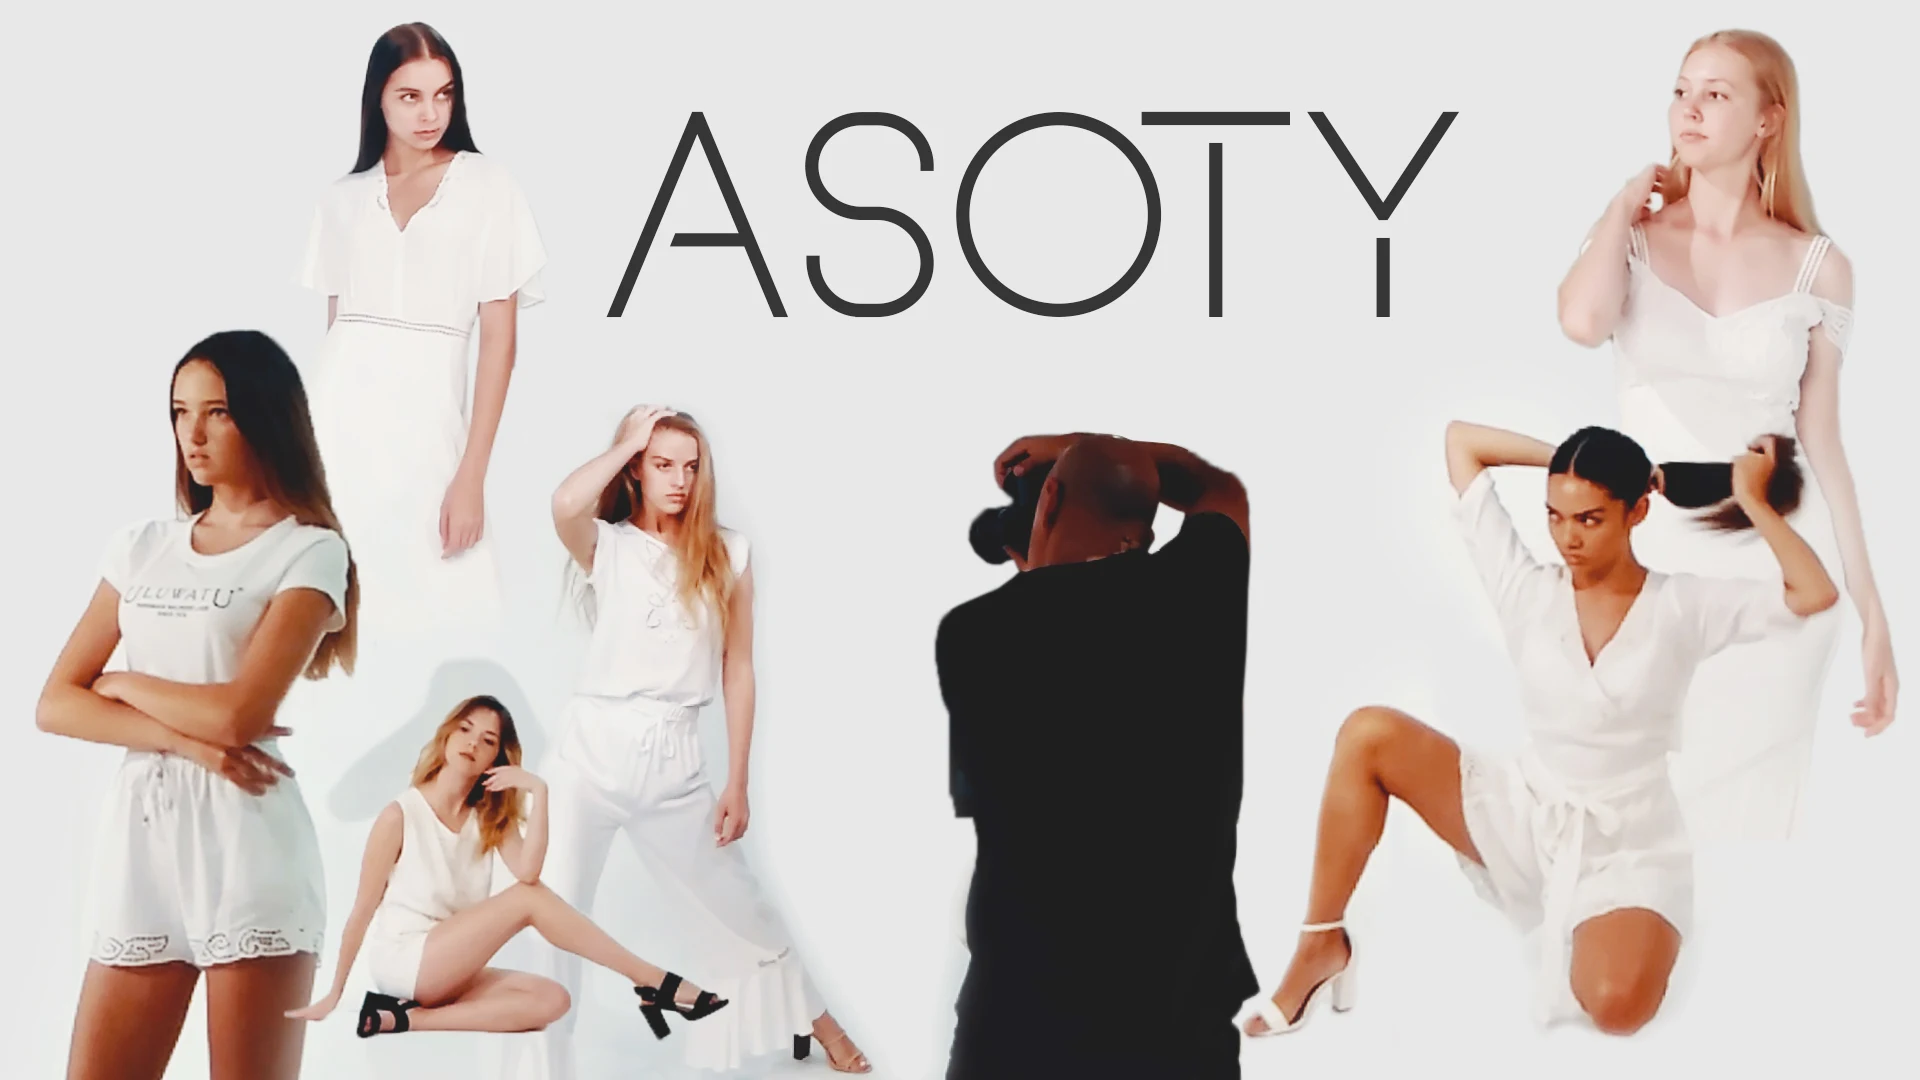 Behind The Scene ASOTY Photo Session 2020 | Australian Super Model Of The Year